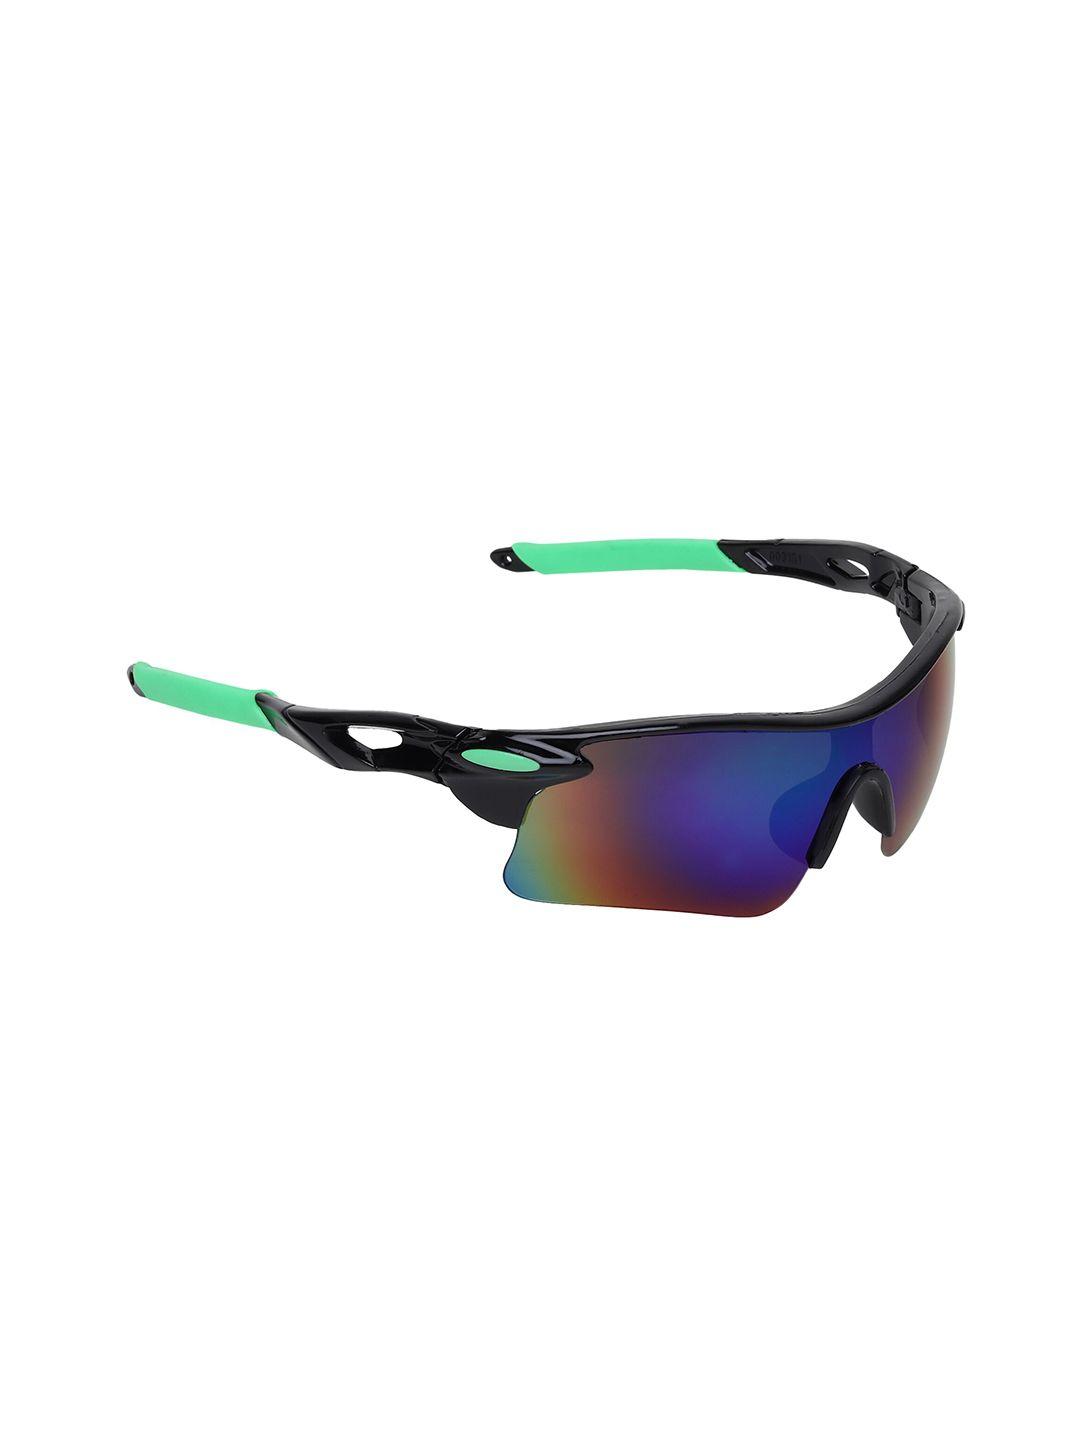 swiss design sports sunglasses with uv protected lens sdsg-9181-02